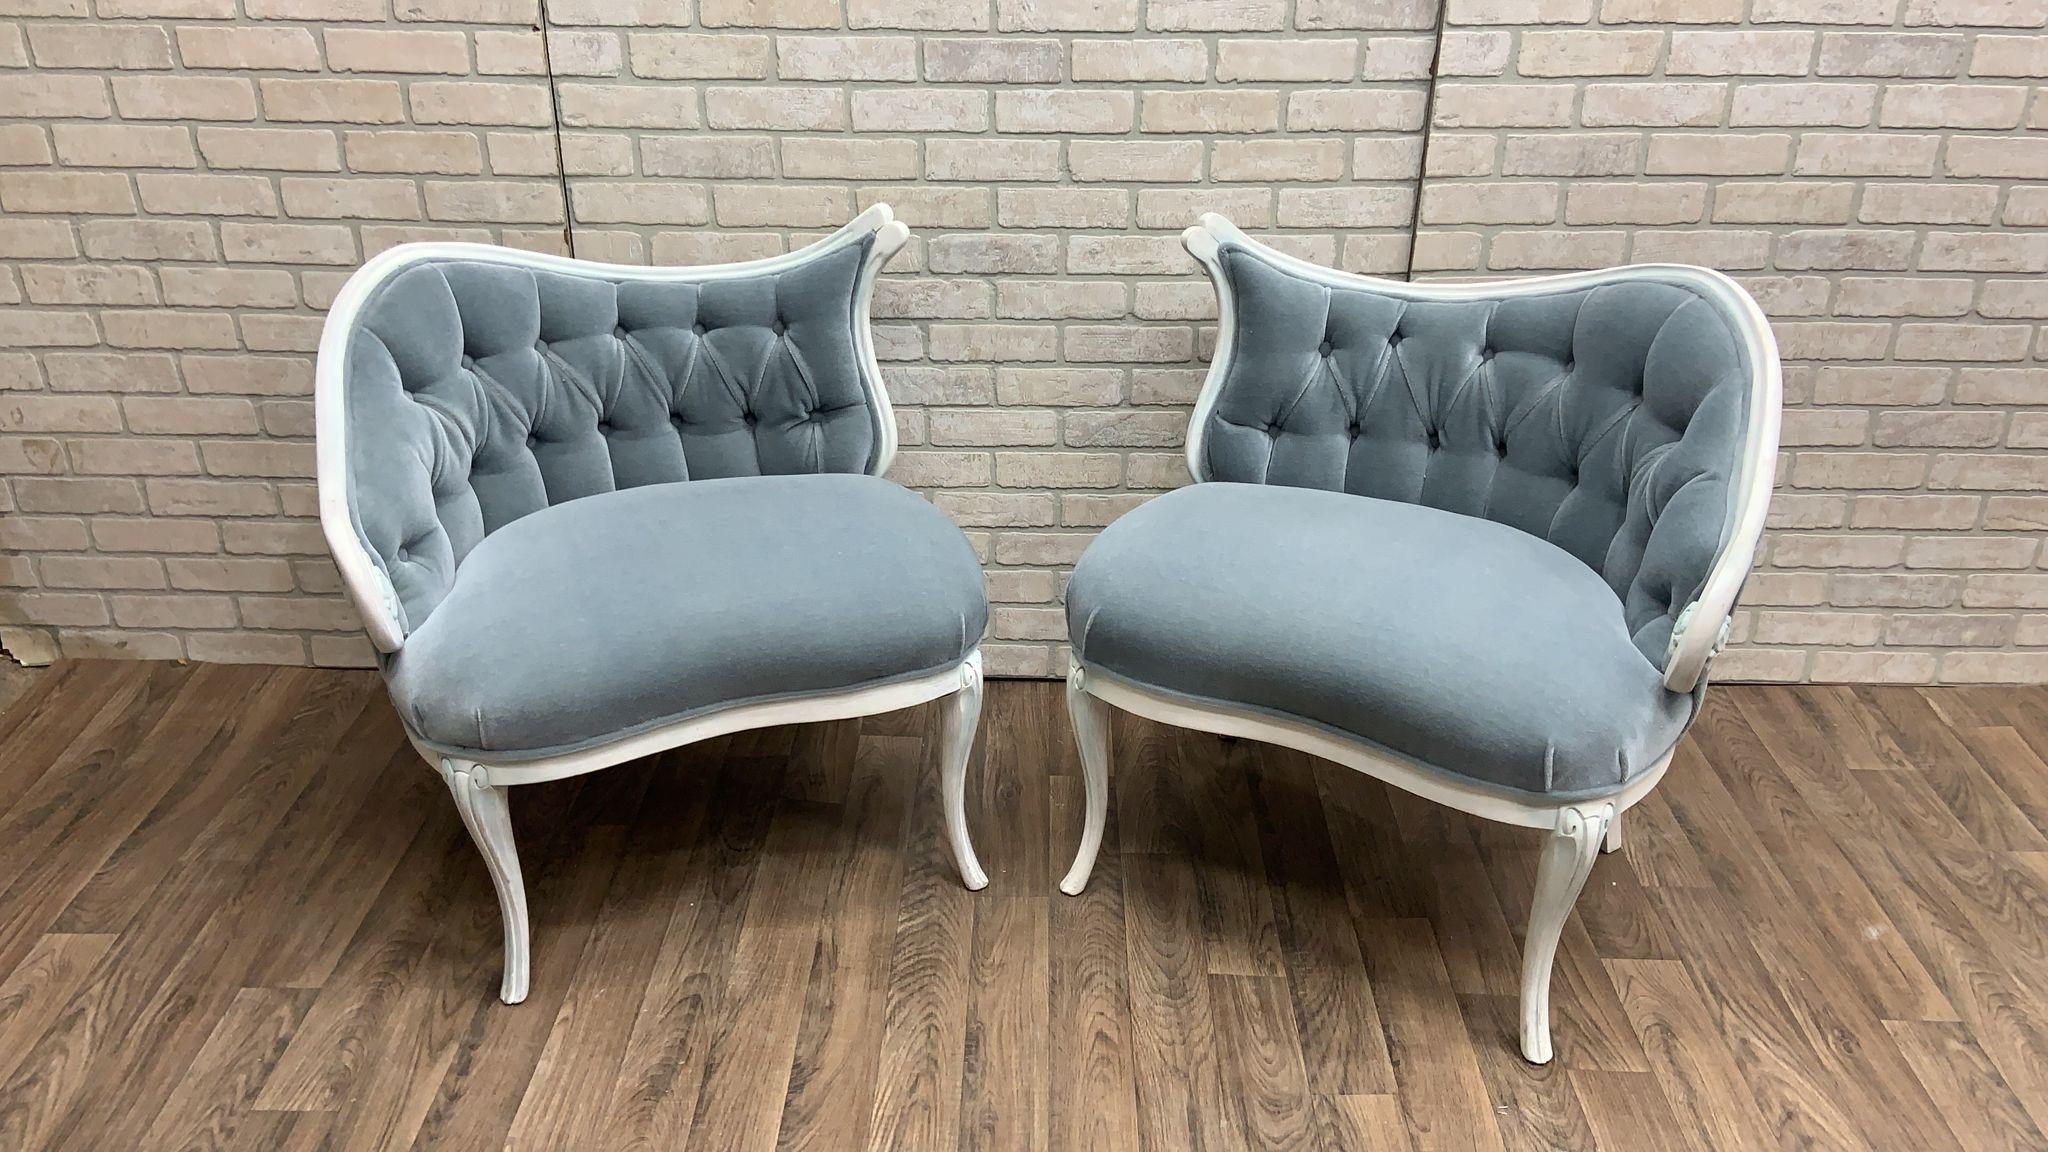 Vintage French Rococo Style Asymmetrical Fireside Ice Blue Mohair Chairs - Pair For Sale 8